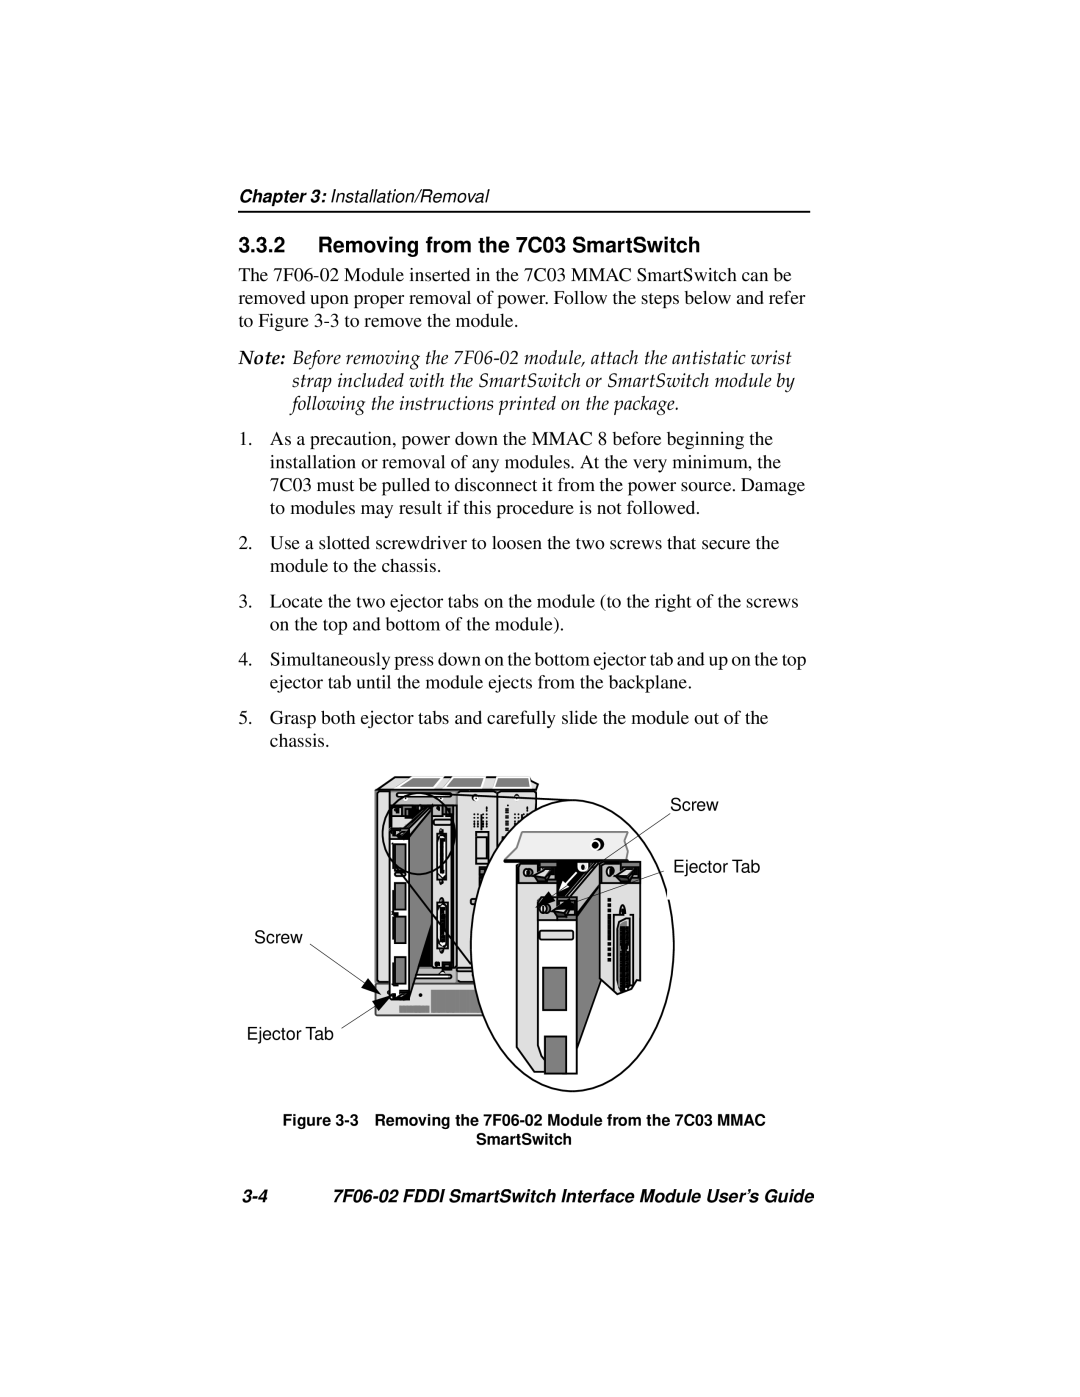 Cabletron Systems manual Removing from the 7C03 SmartSwitch, 3-4 7F06-02 FDDI SmartSwitch Interface Module User’s Guide 